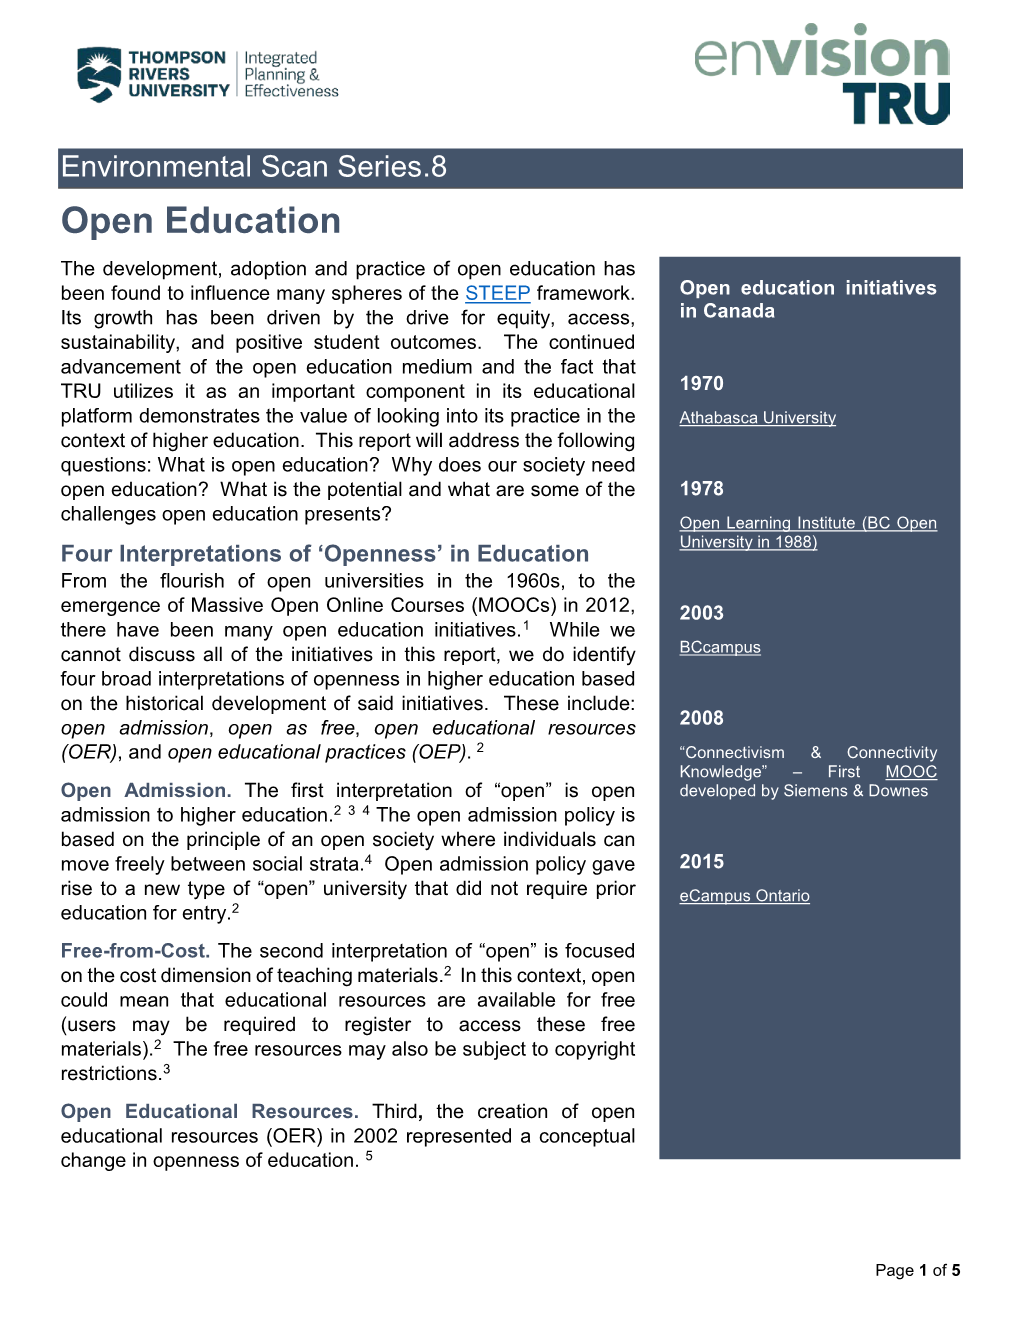 Open Education the Development, Adoption and Practice of Open Education Has Been Found to Influence Many Spheres of the STEEP Framework